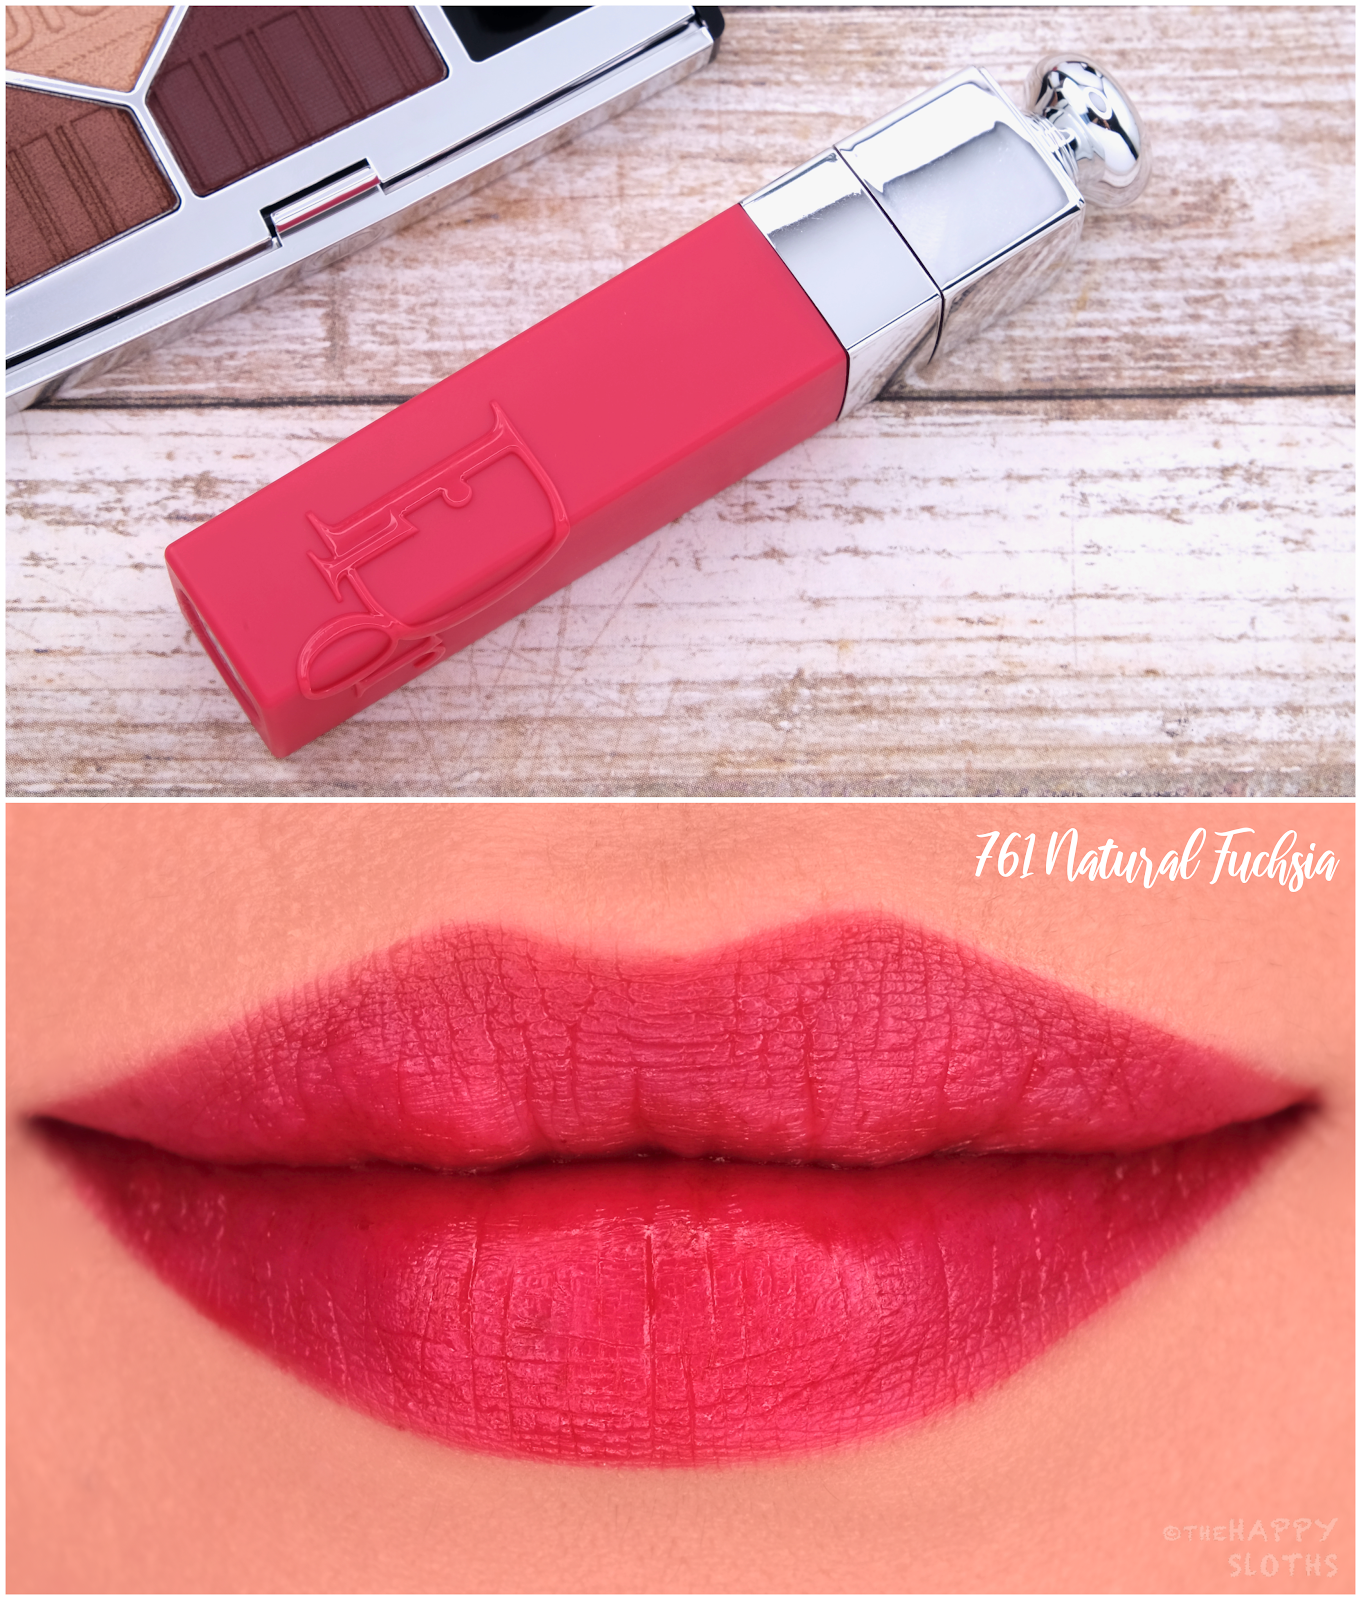 Dior | Dior Addict Lip Tint in "761 Natural Fuchsia": Review and Swatches